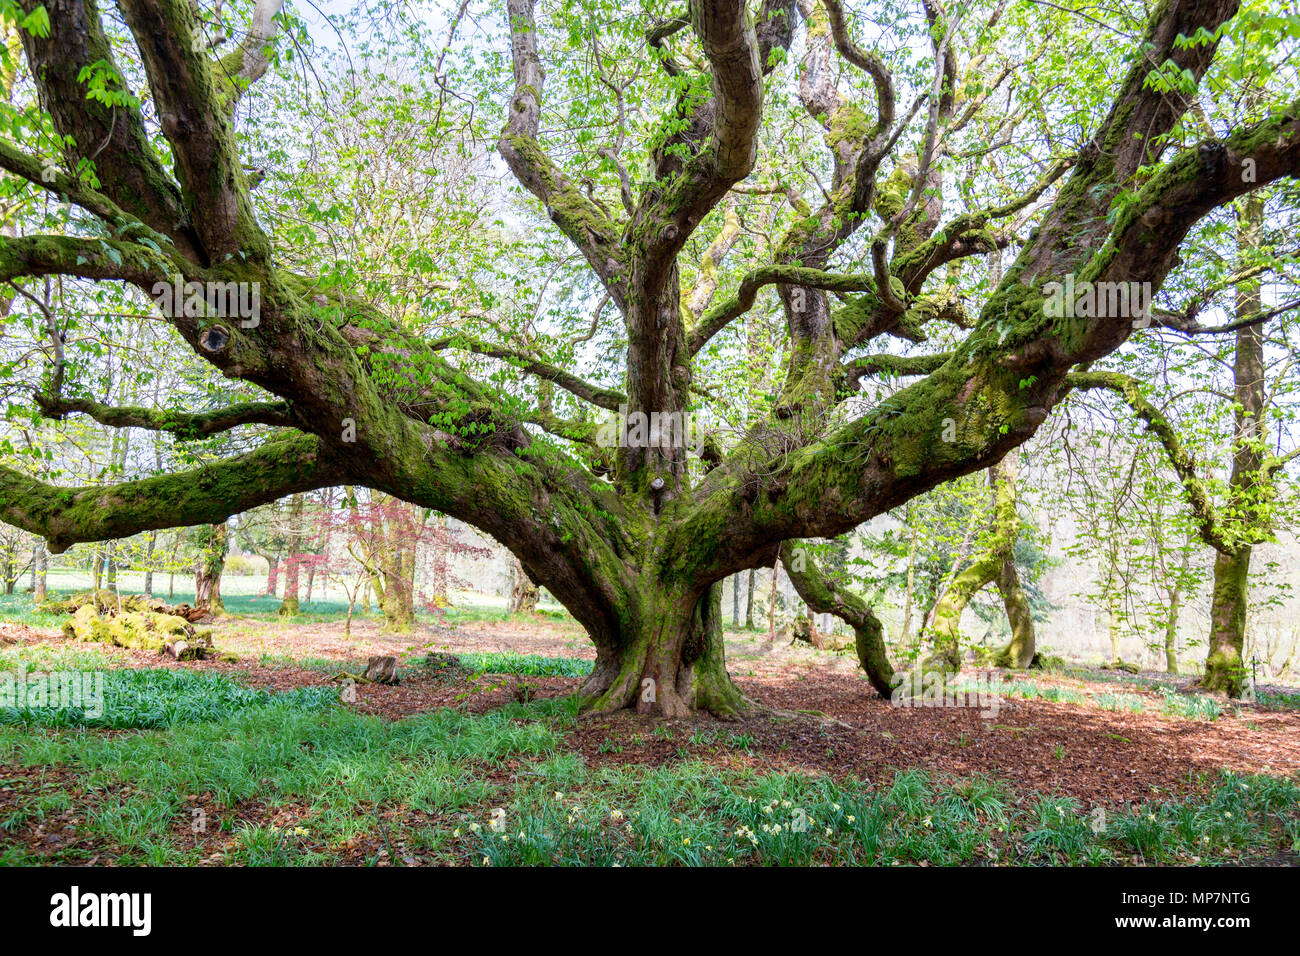 An ancient horse chestnut tree (Aesculus hippocastanum) with branches covered in moss in the grounds of Inveraray Castle, Argyll & Bute, Scotland, UK Stock Photo